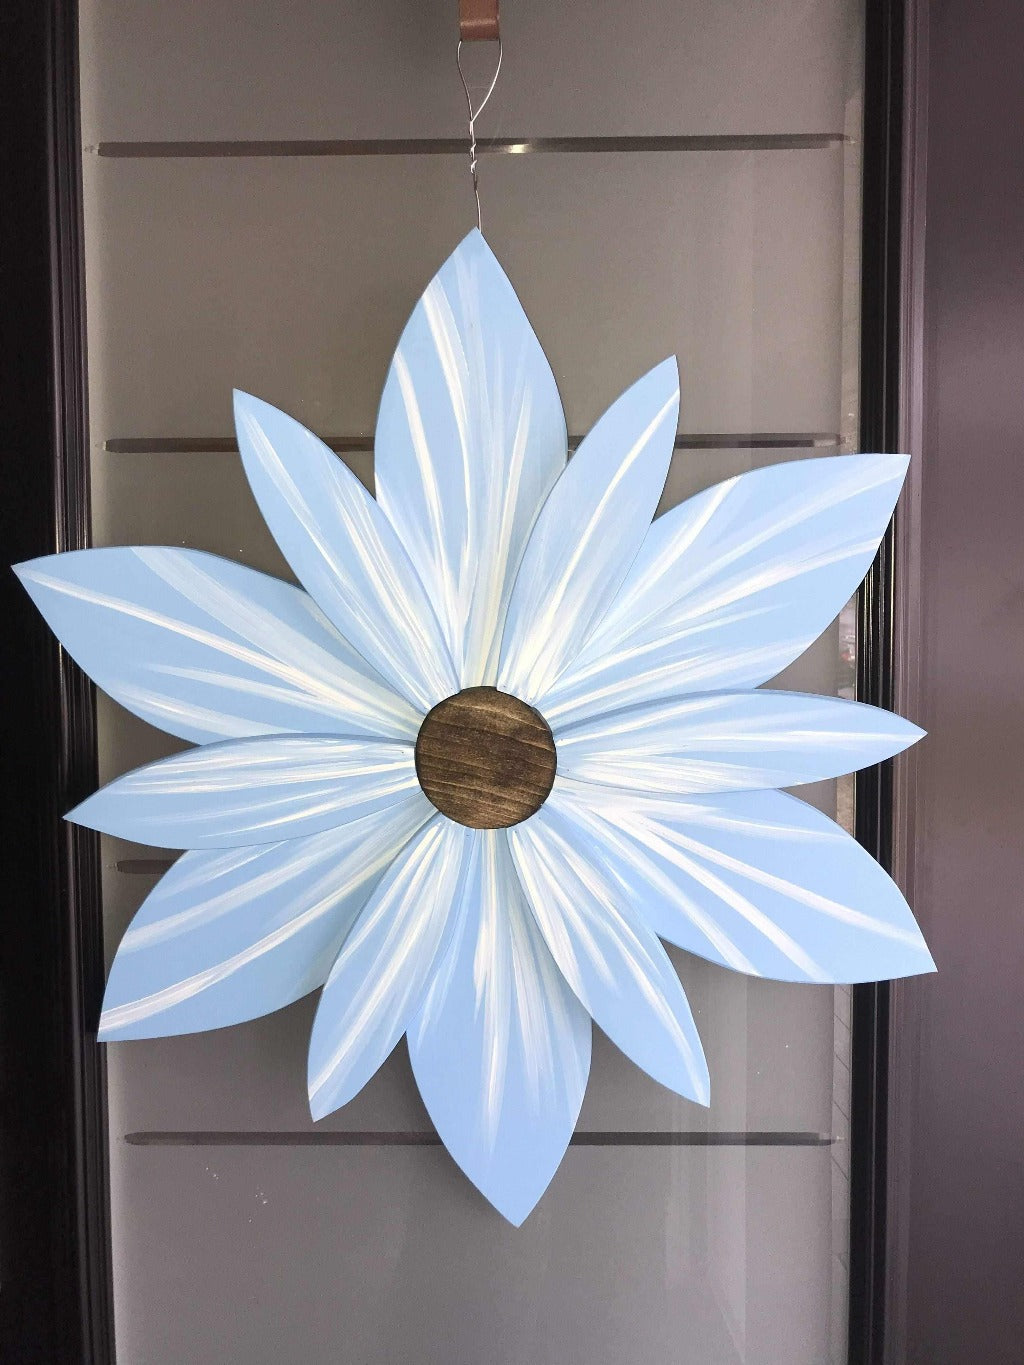 Atlantic Wood N Wares Home & Garden>Home Décor>Wall Decor>Wall Hangings Medium 26 x 26 inches What is a Costa Rica Blue Wood Flower and How to Get One for Your Door 